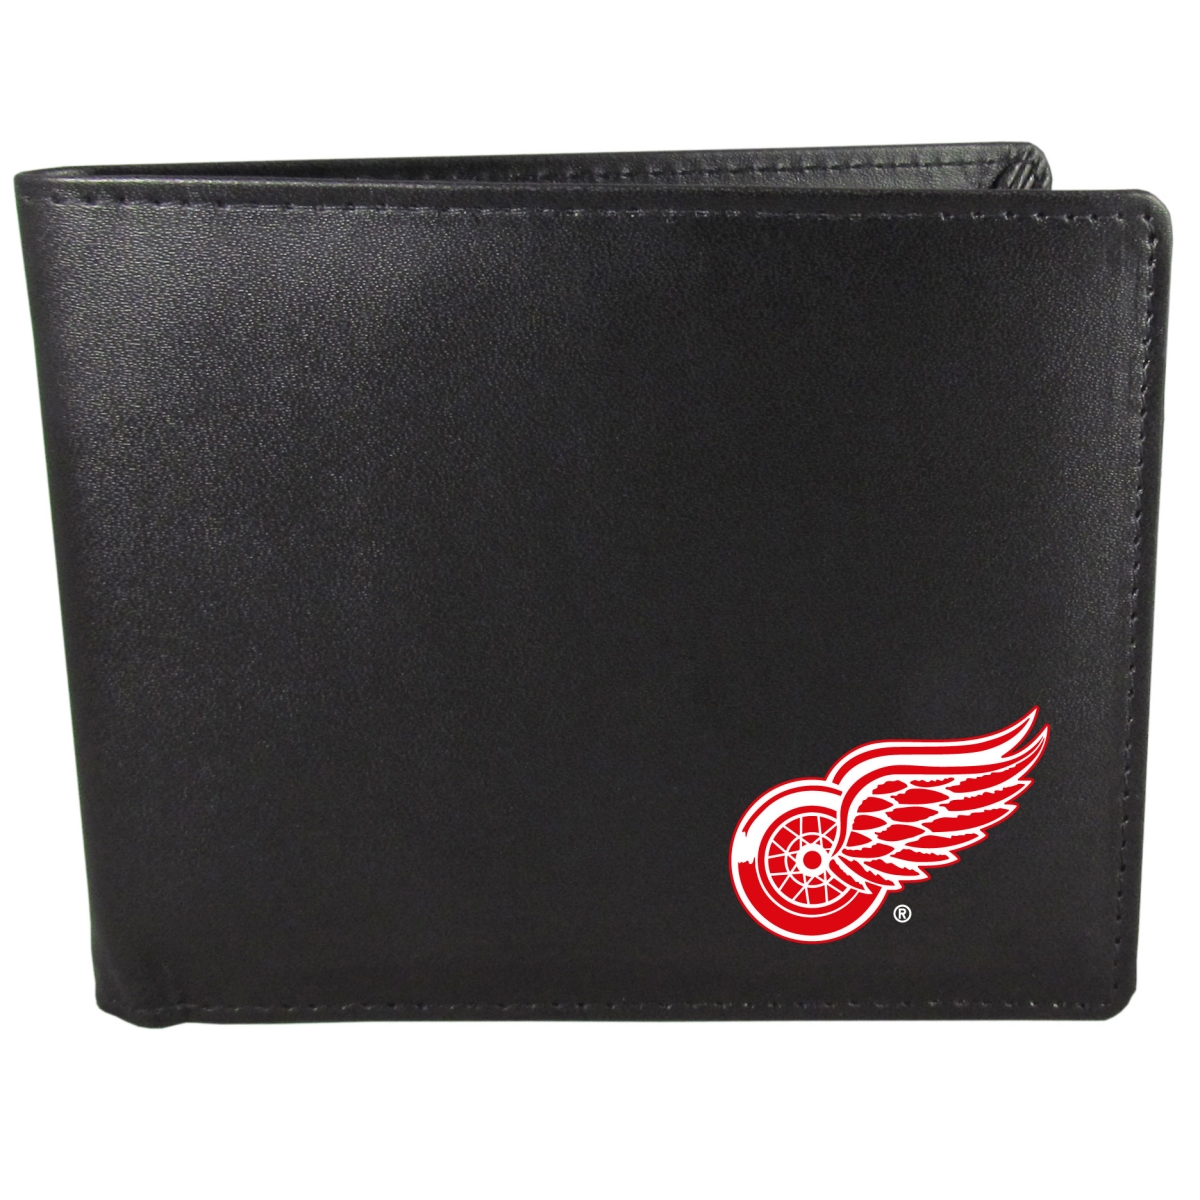 Picture of Siskiyou HBWP110 Male NHL Detroit Red Wings Bi-fold Wallet - One Size